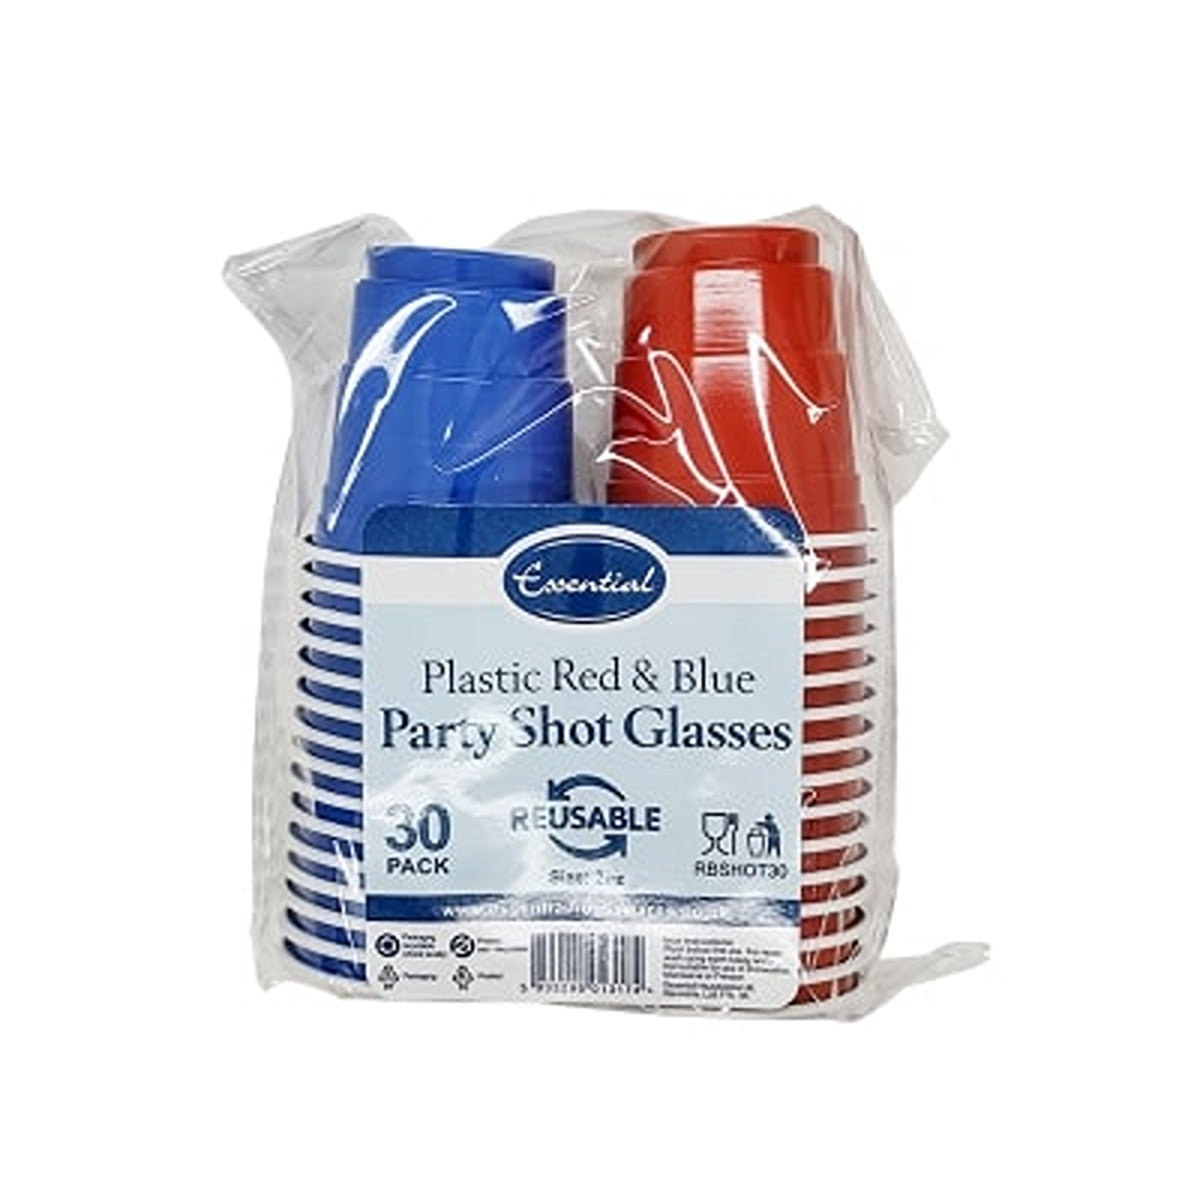 Essential - Shot Glasses - Pack of 30 - Continental Food Store